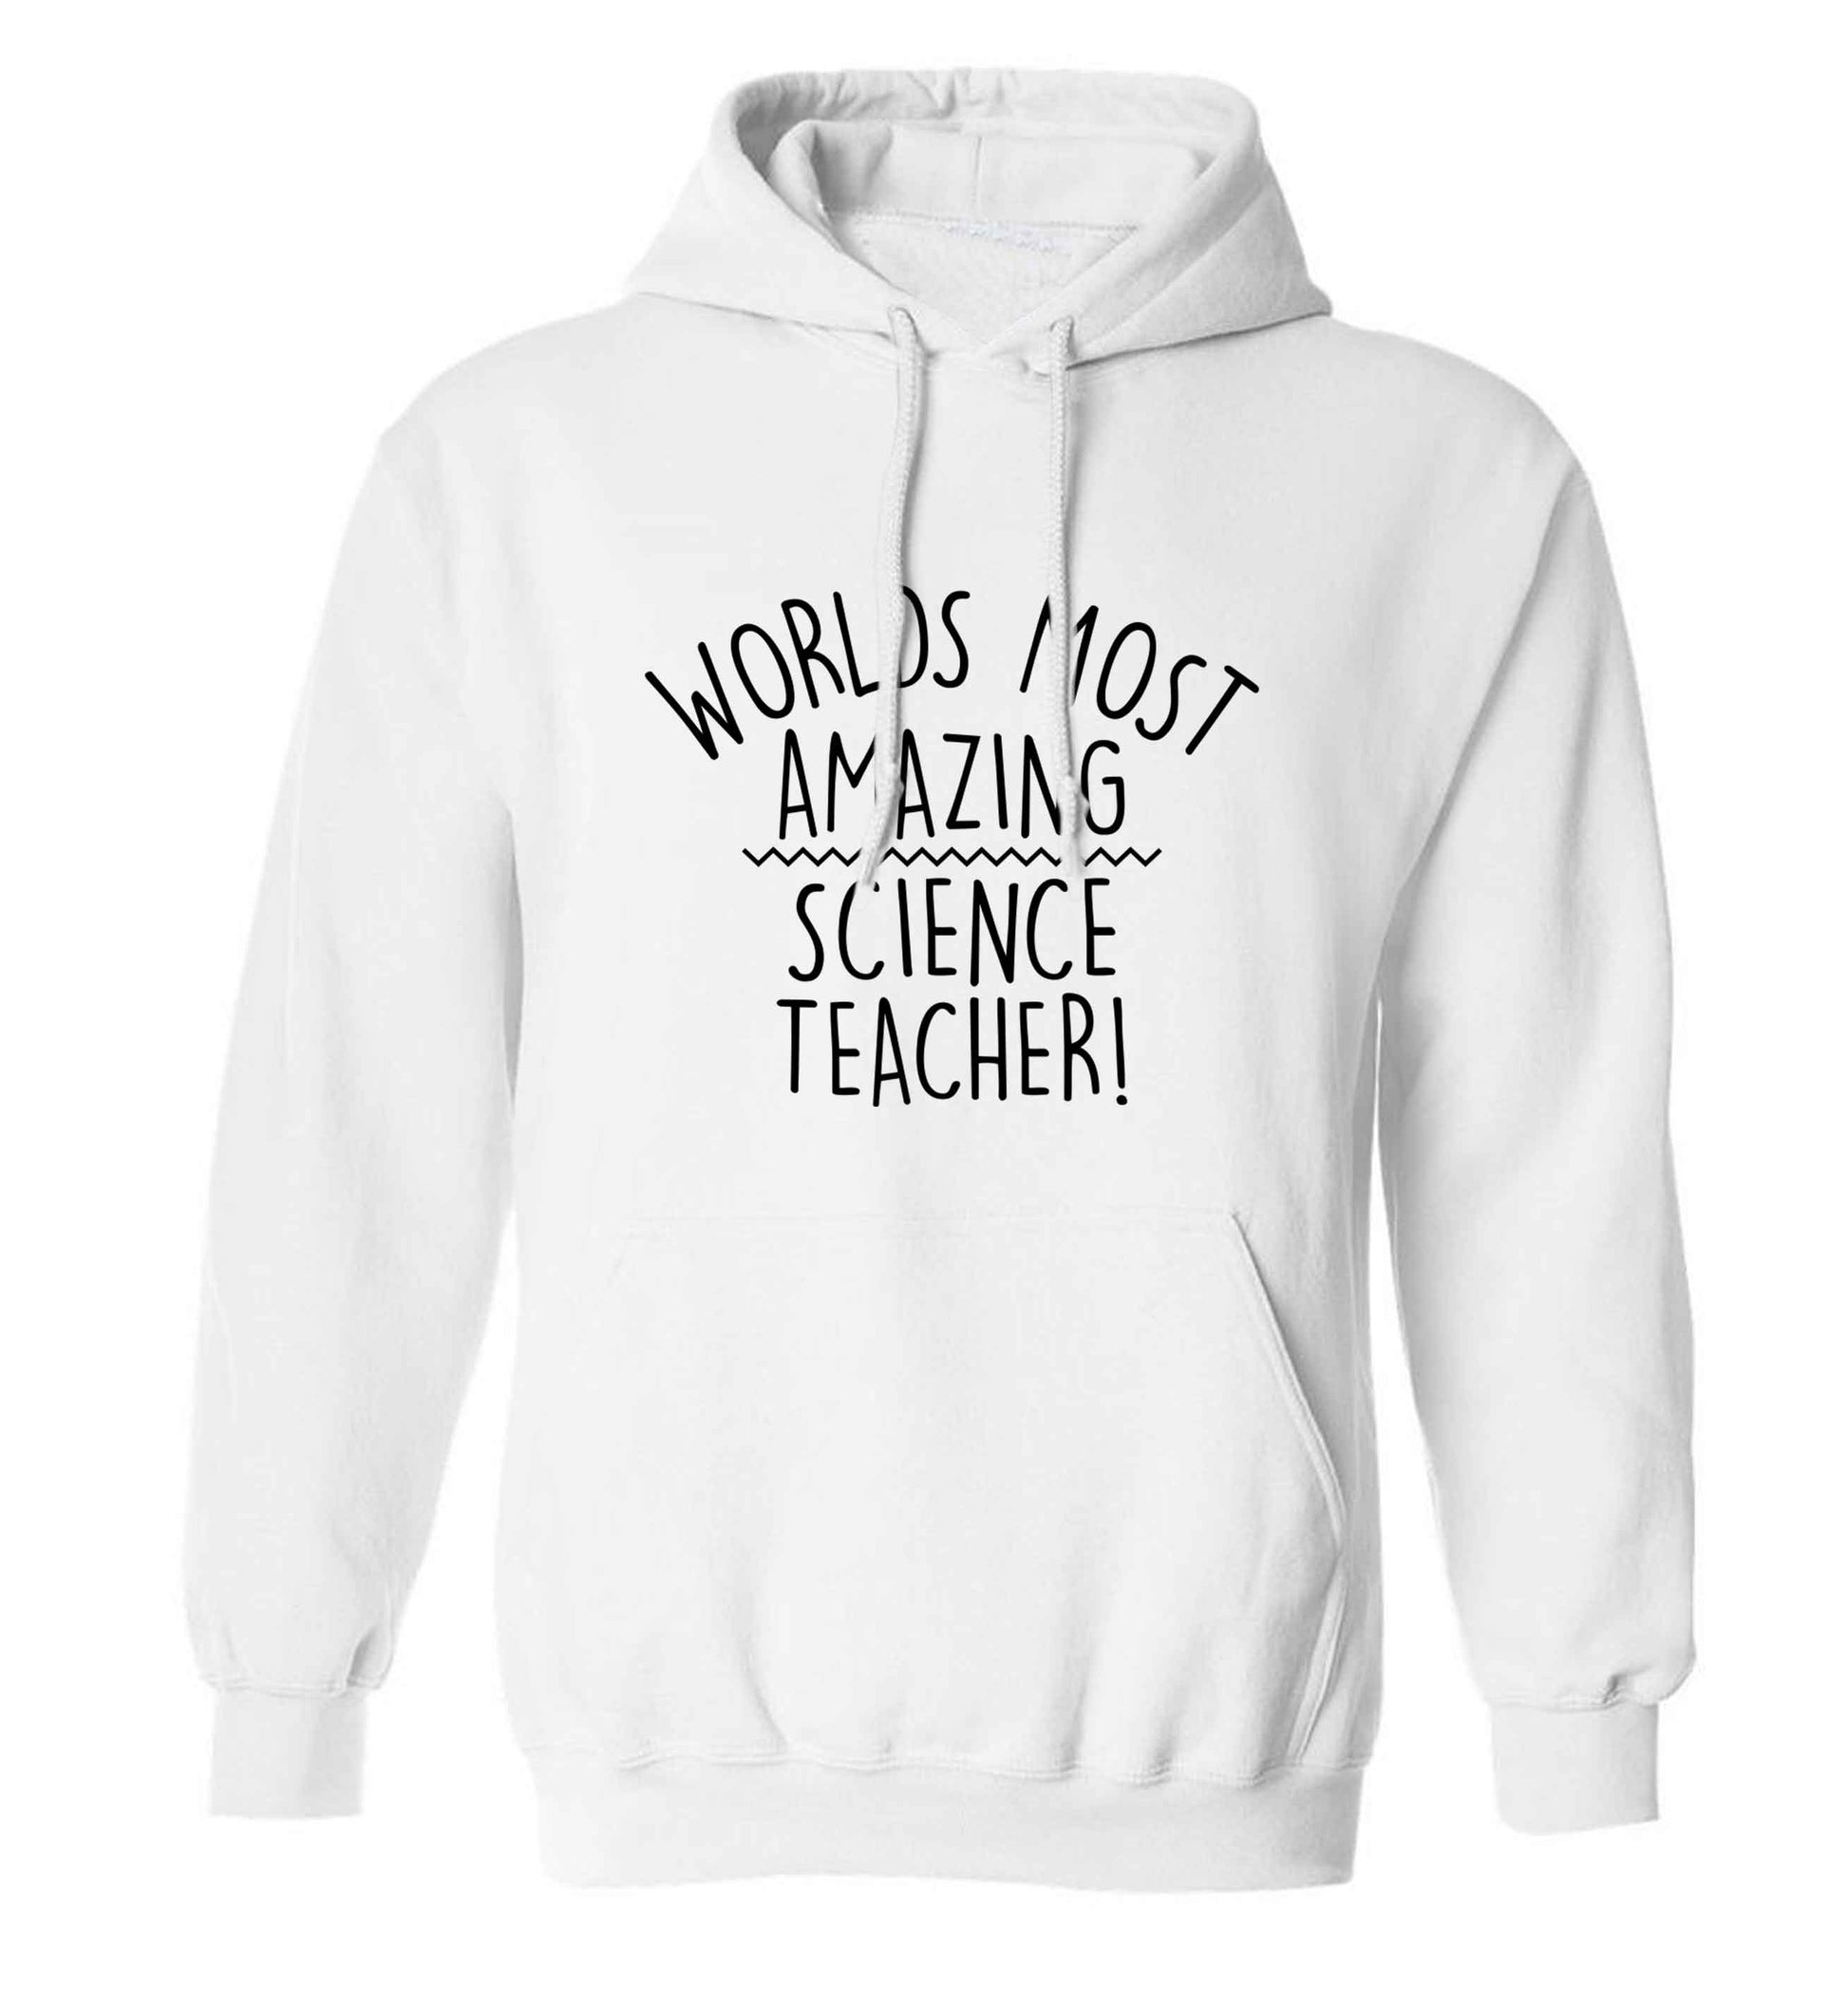 Worlds most amazing science teacher adults unisex white hoodie 2XL